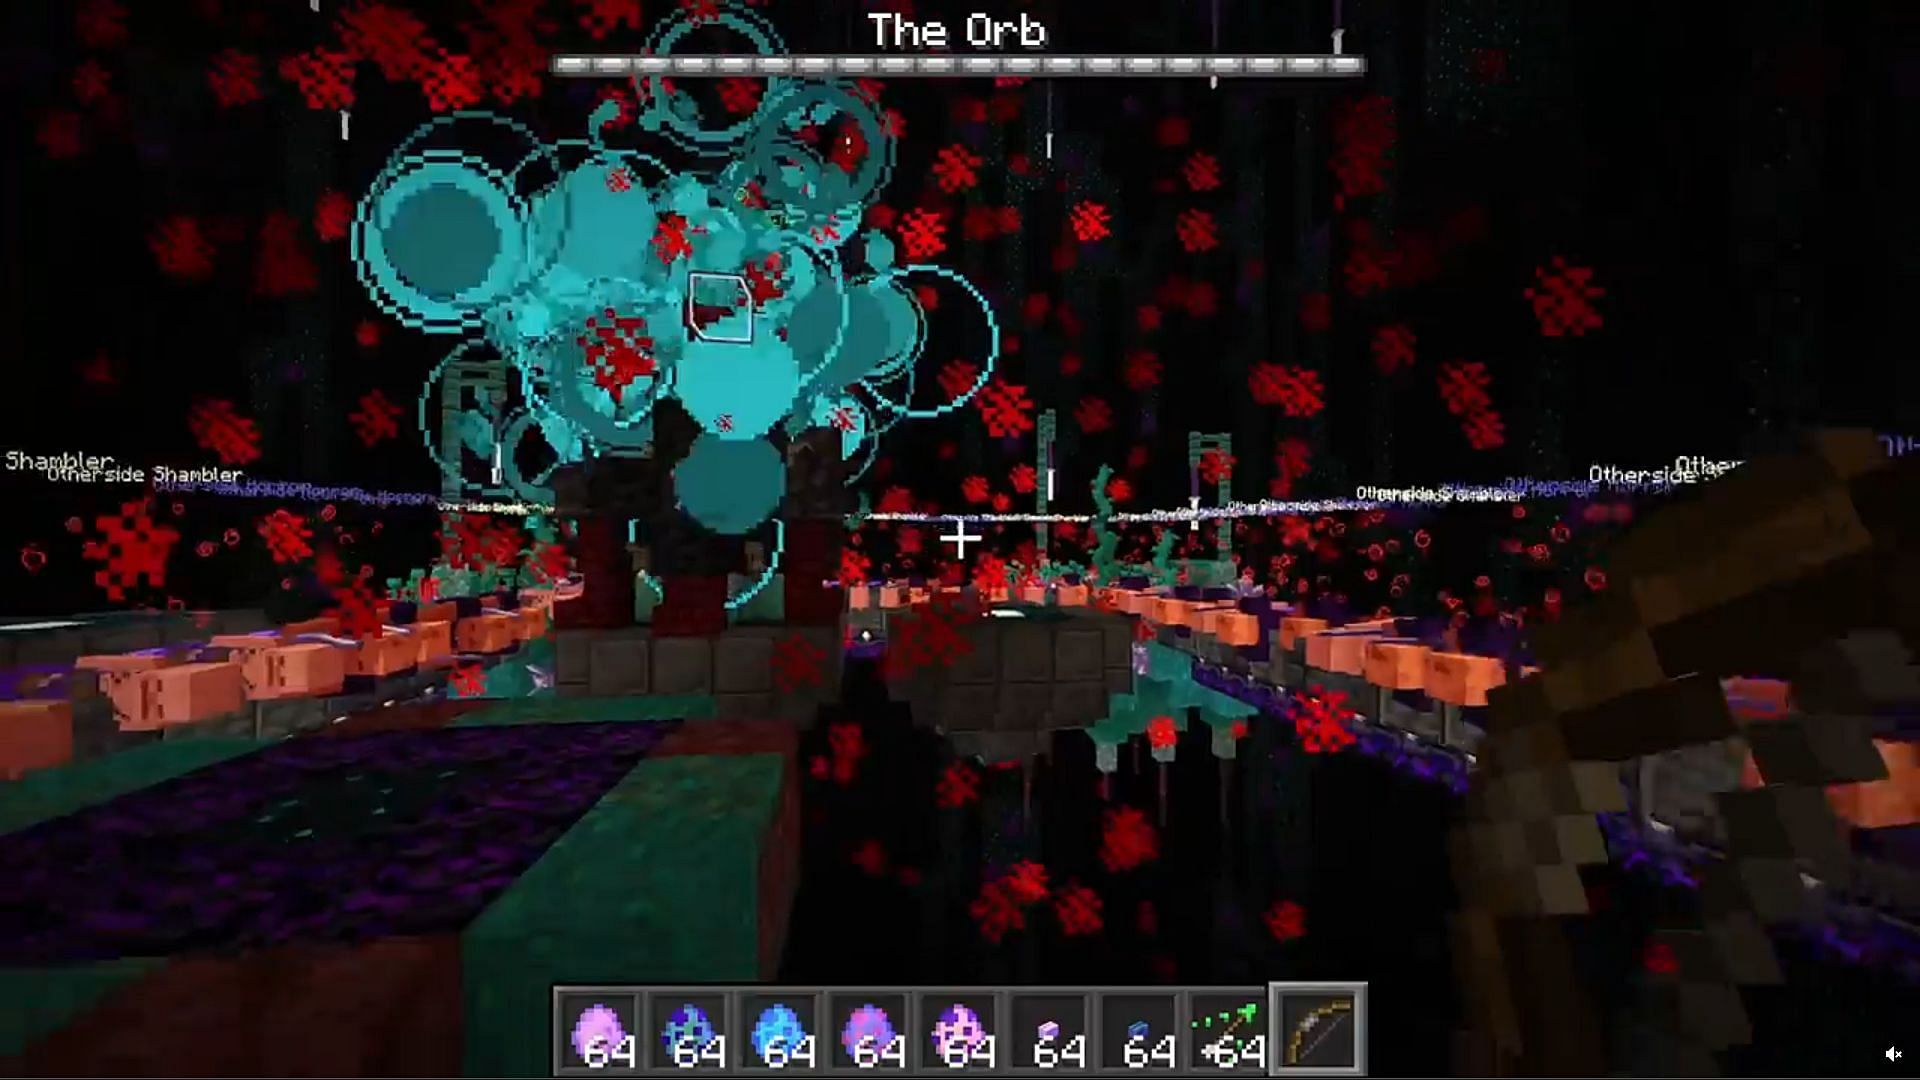 Minecraft Meets Tower Defense' Game Block Fortress Adds Co-op